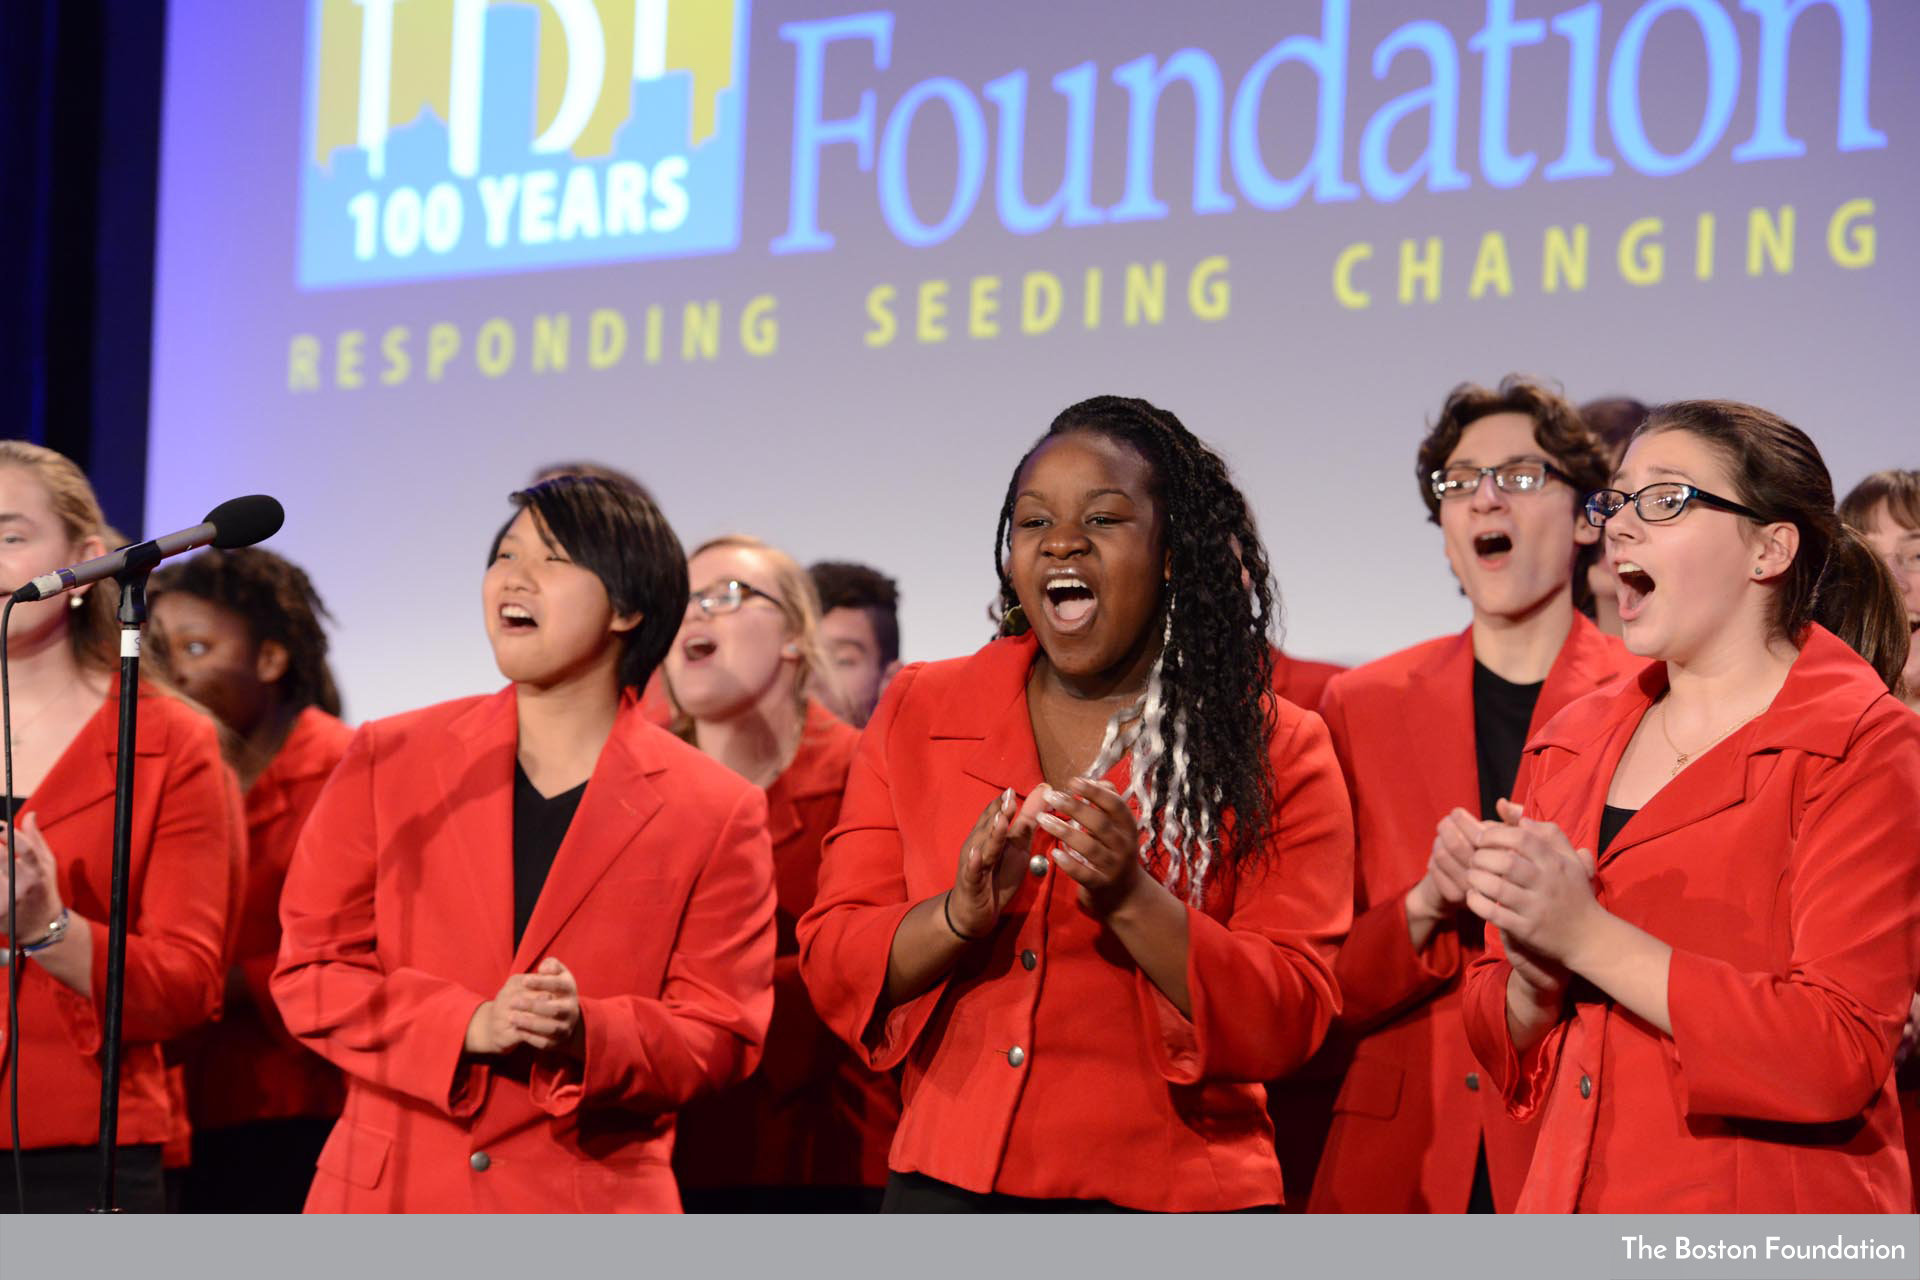 Teens in red jackets sing on stage at The Boston Foundation's centennial